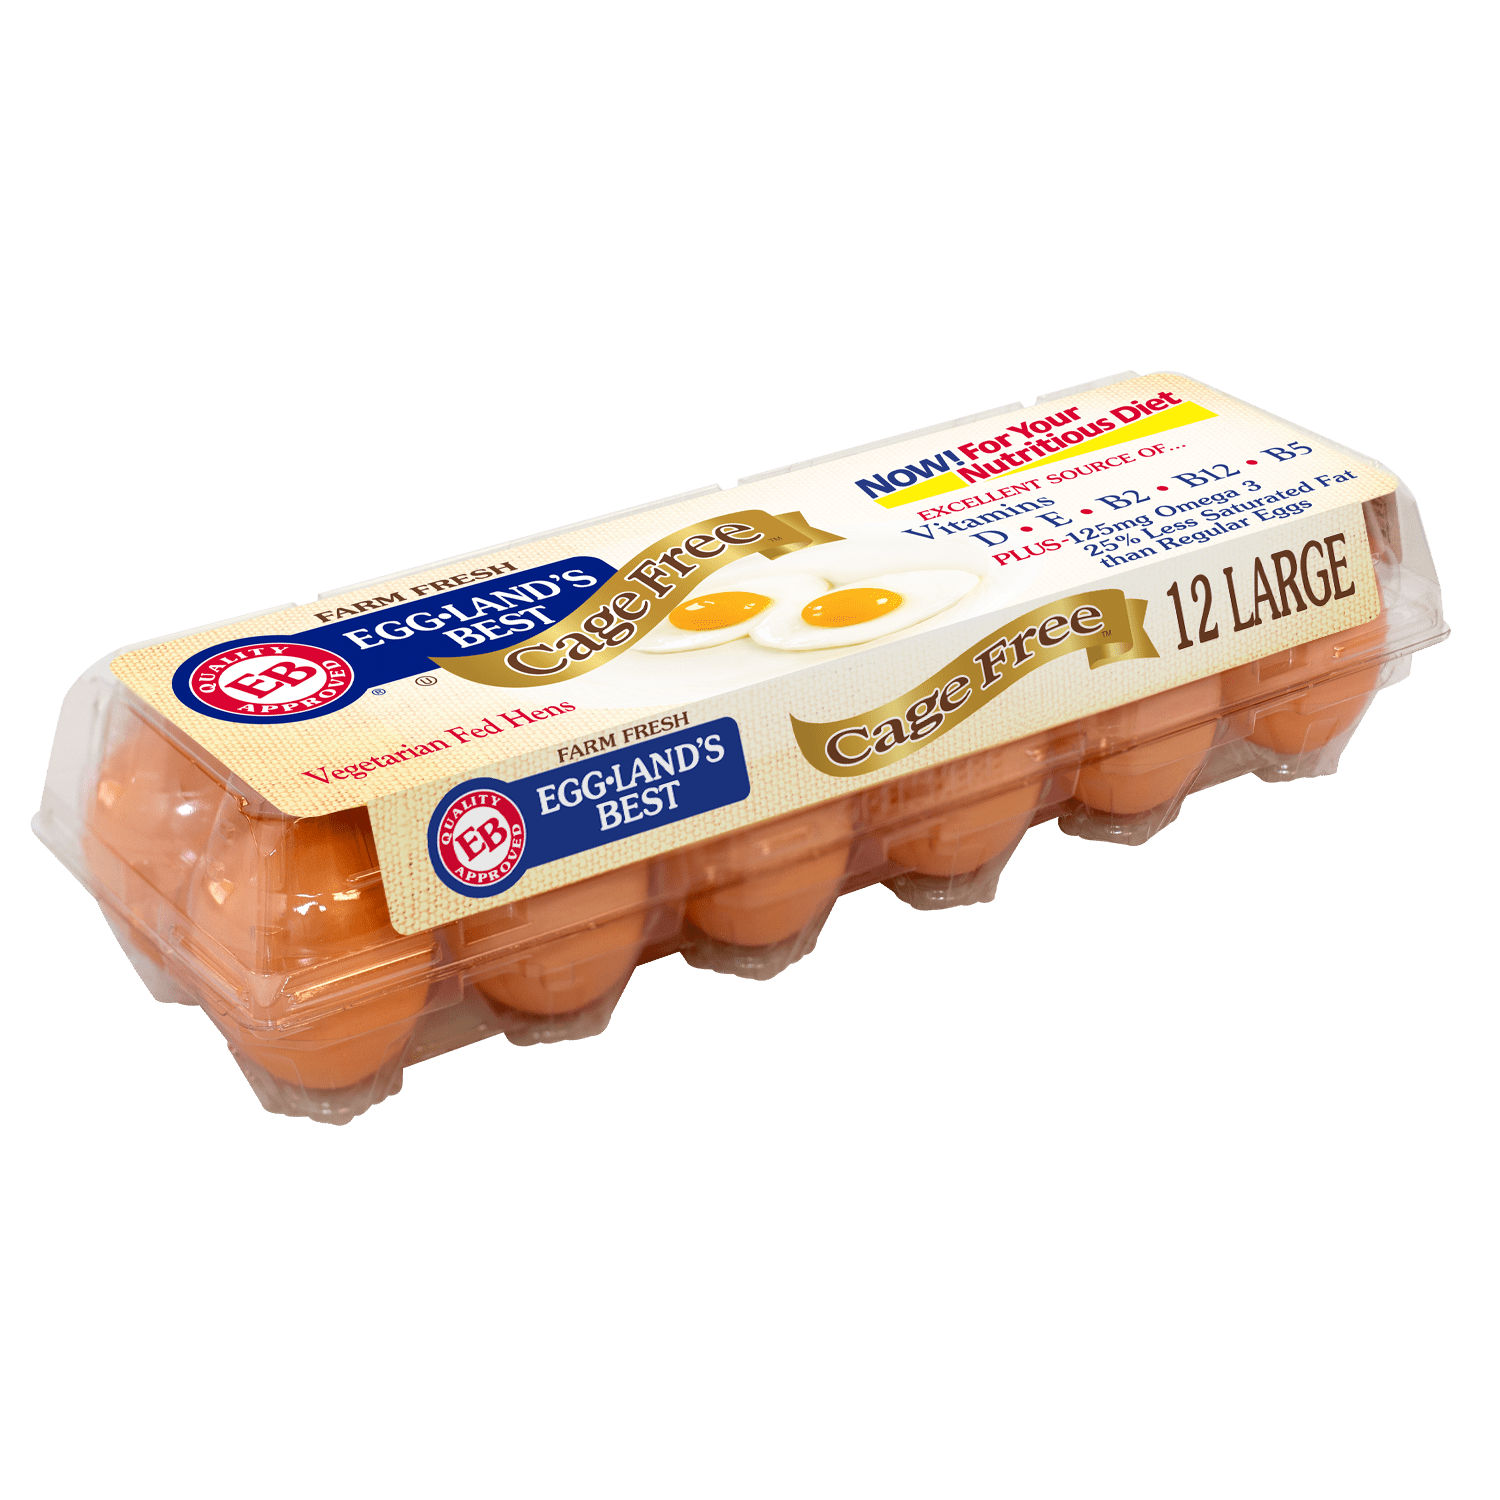 Eggland's Best Farm Fresh Cage Free Large, Brown, Grade A Eggs, 12 Count